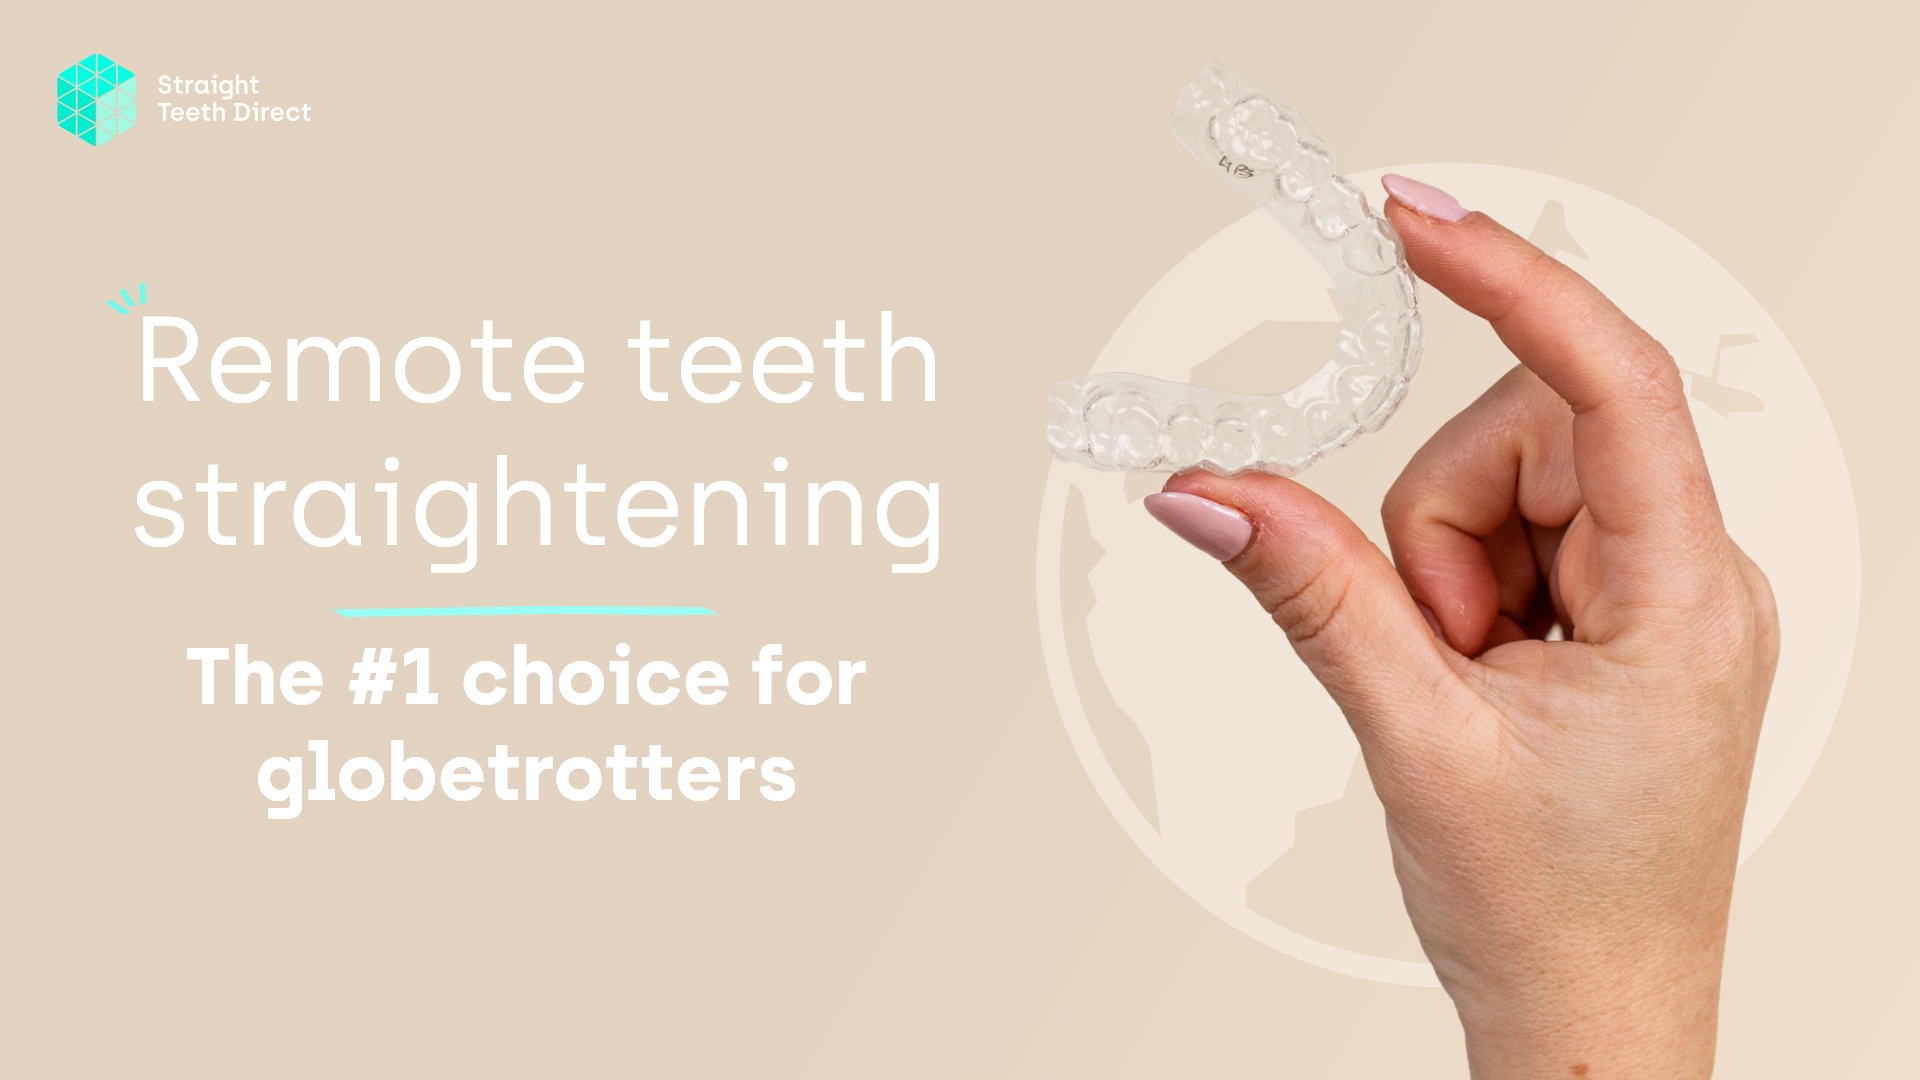 Remote teeth straightening for globetrotters